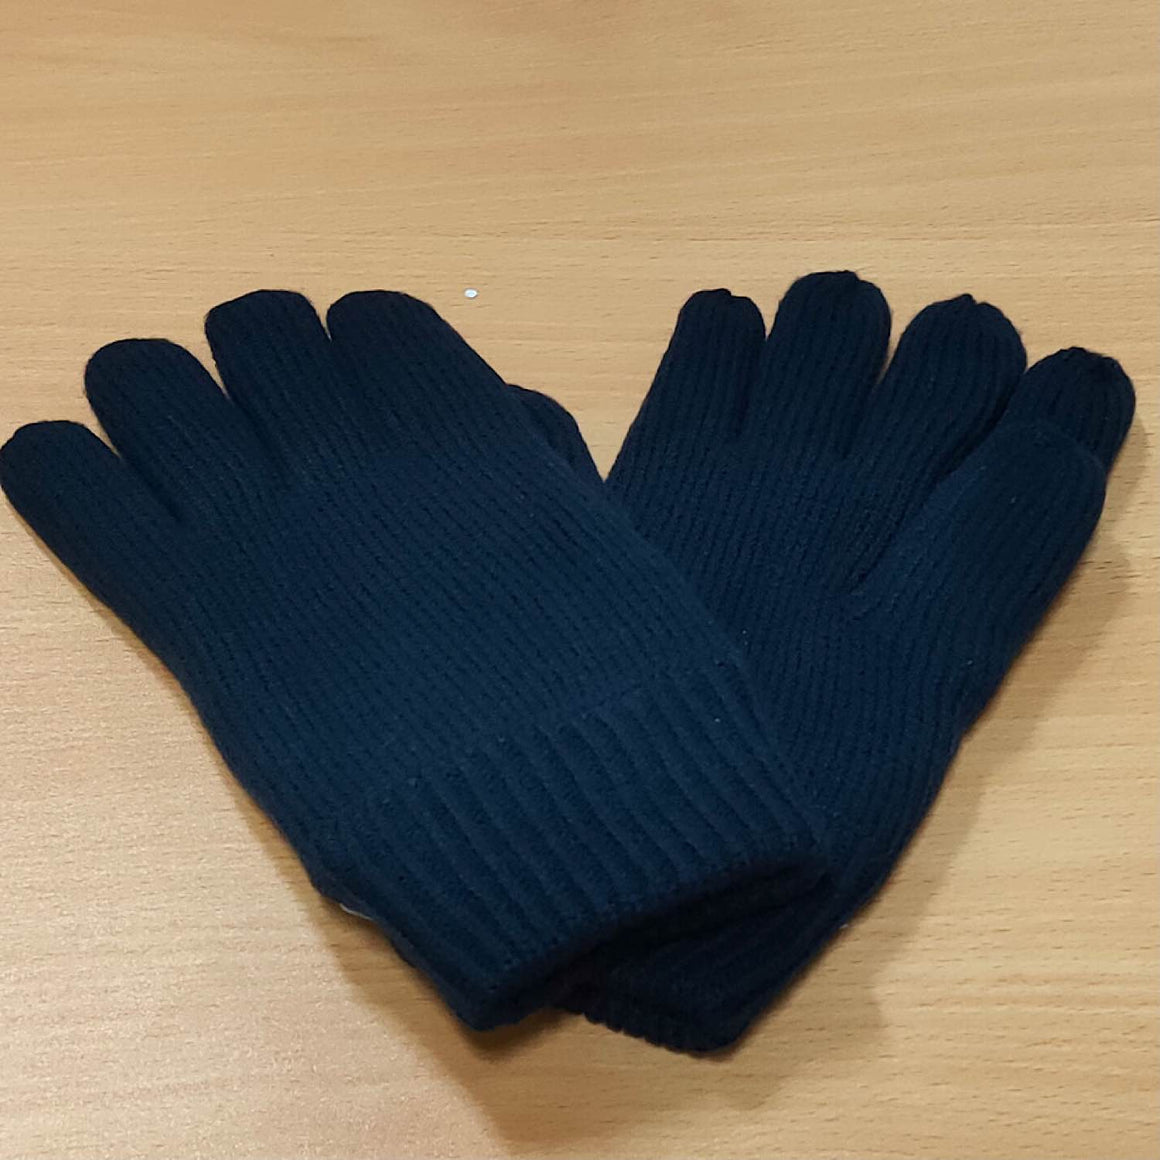 Avenel Acrylic Glove With Thinsulate Lining - Navy